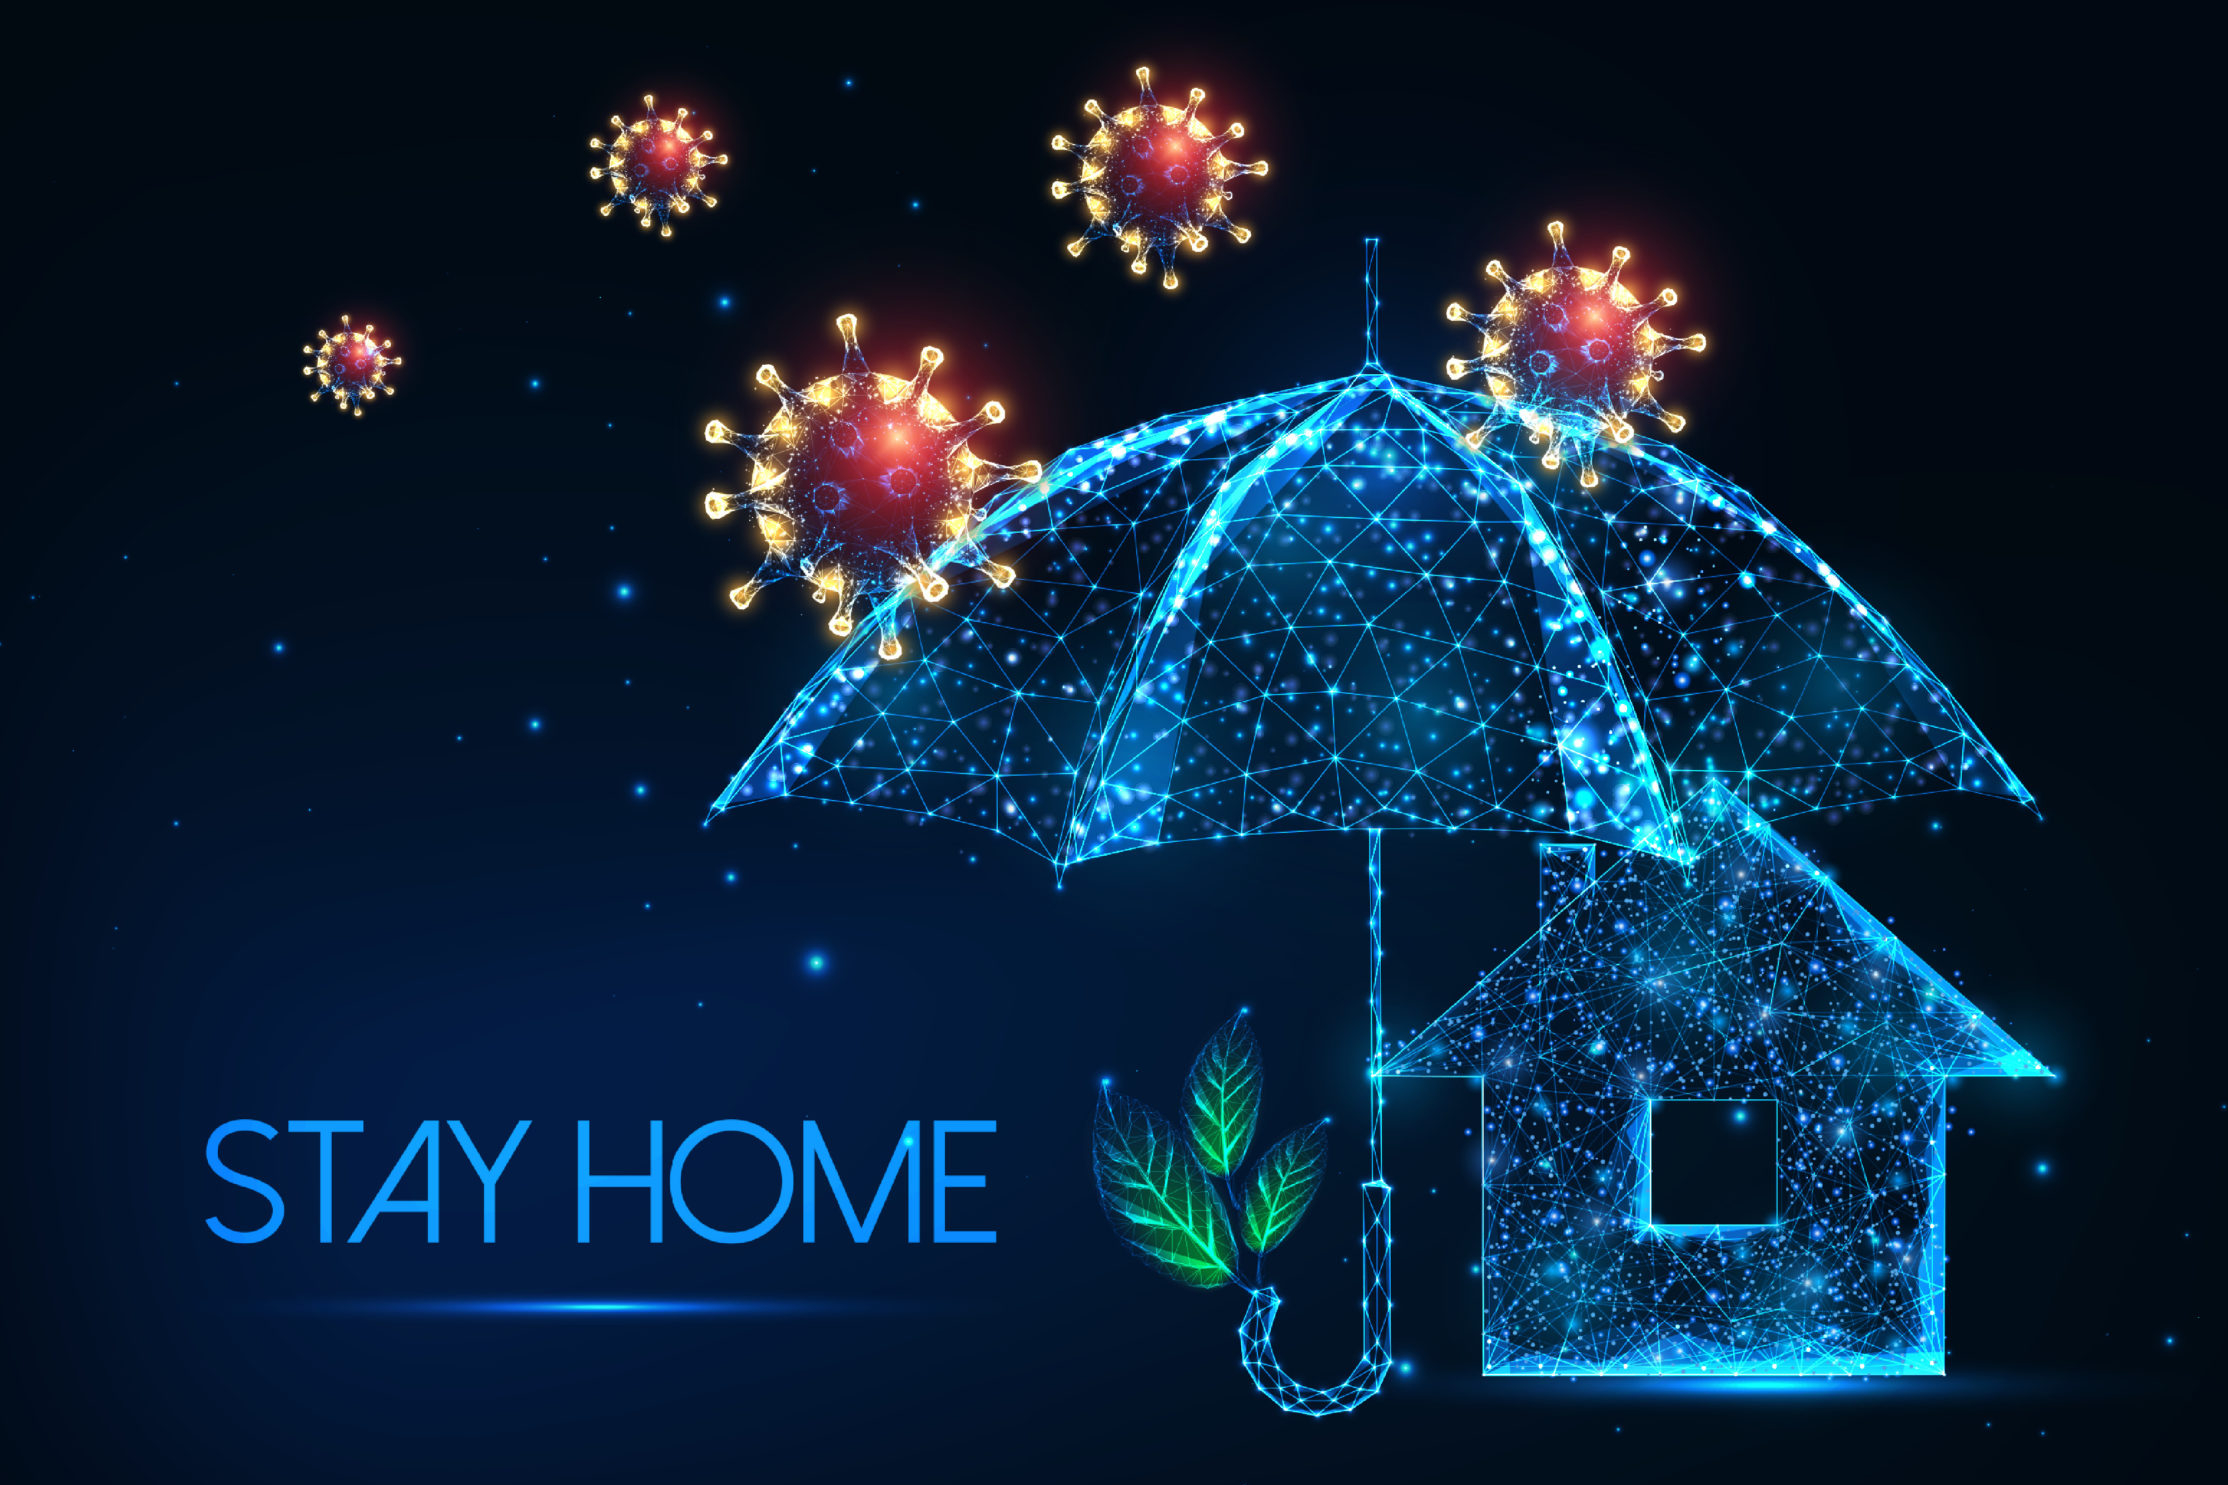 Stay home graphic